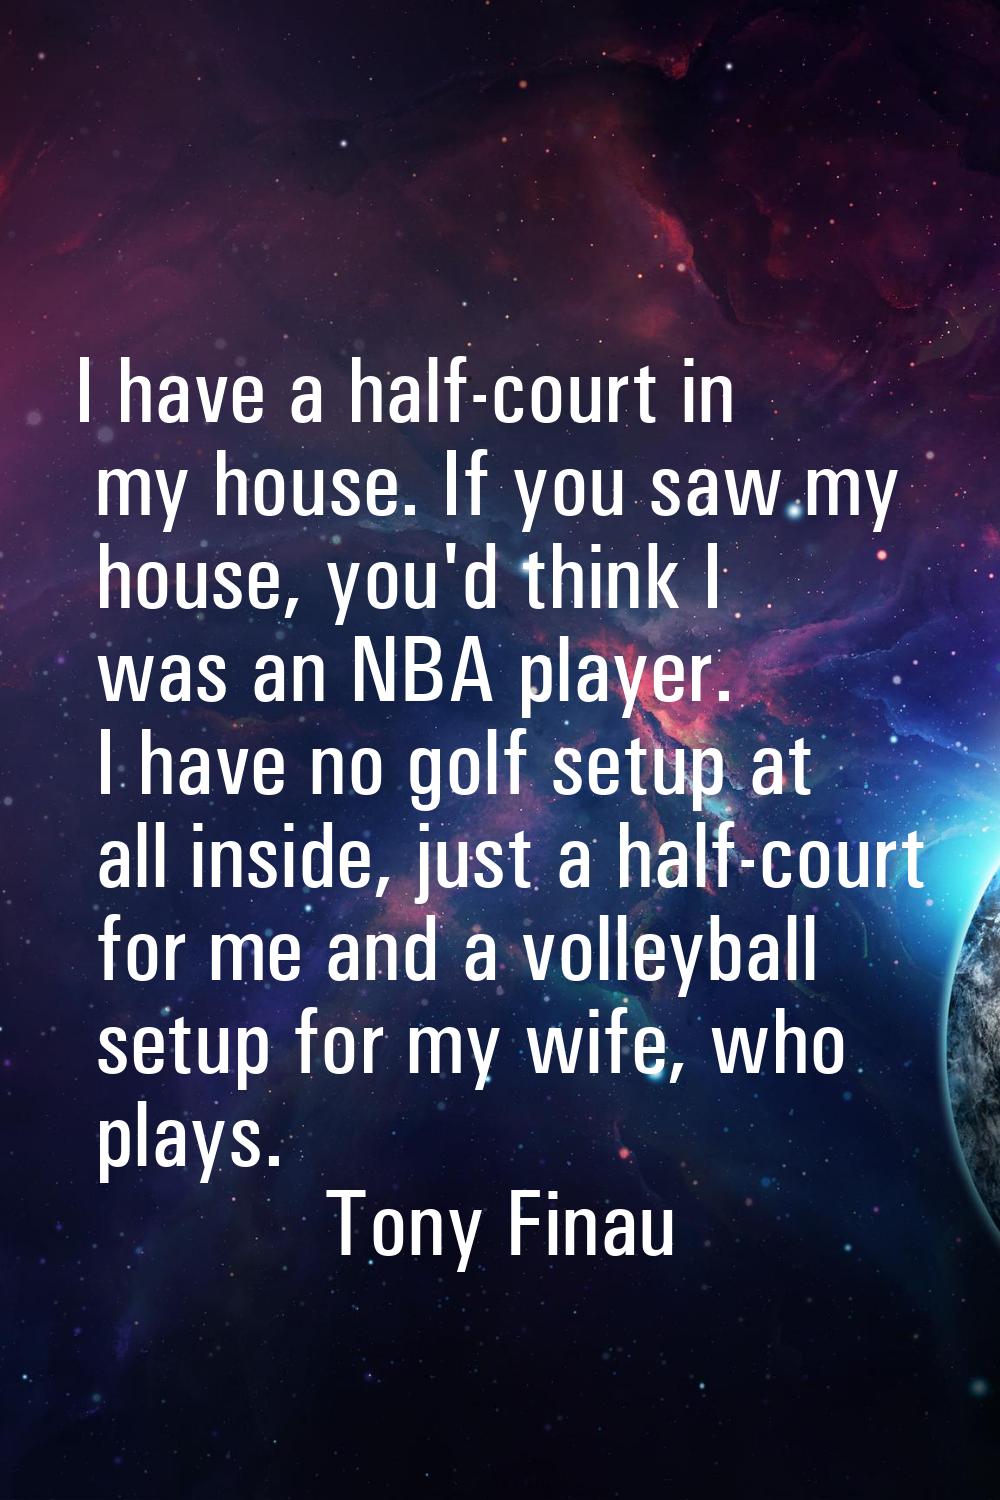 I have a half-court in my house. If you saw my house, you'd think I was an NBA player. I have no go